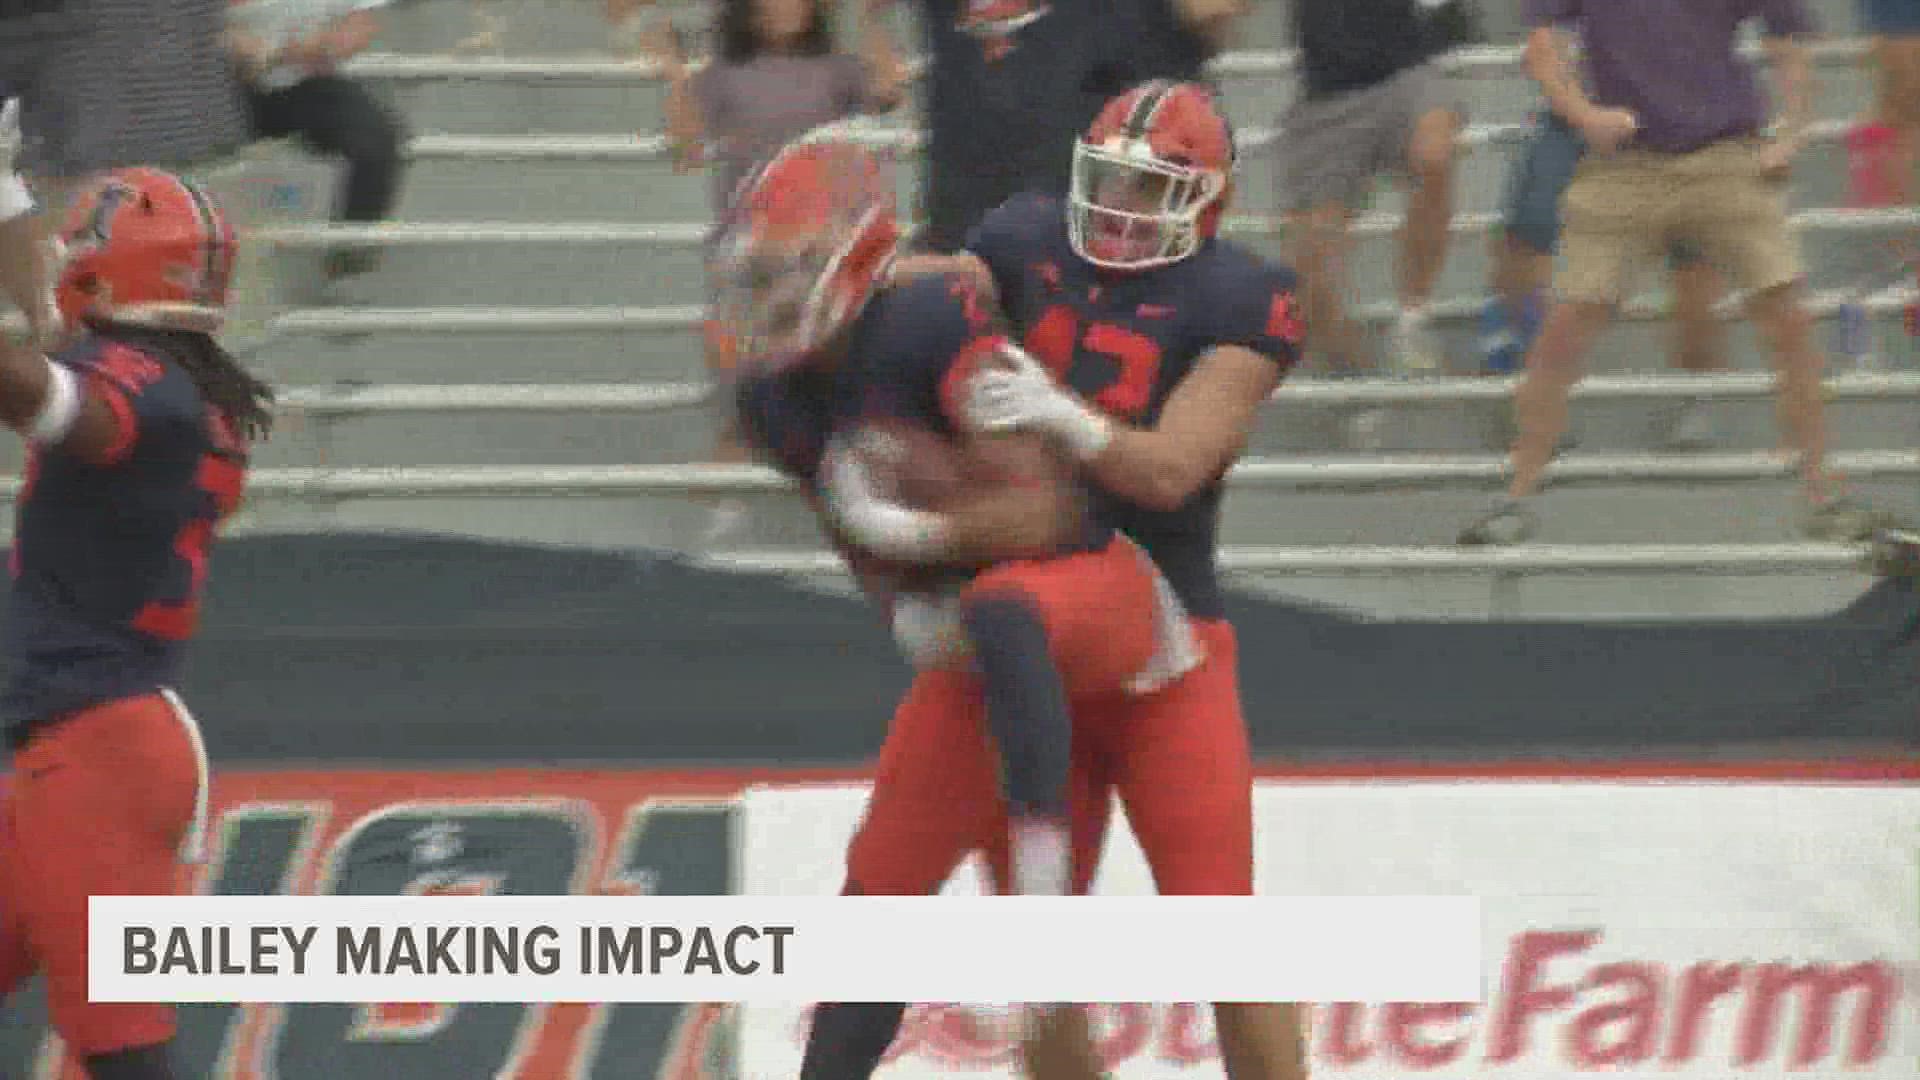 2022 Moline High School graduate Matthew Bailey is already making a name for himself as a playmaker for the Illinois Fighting Illini football team.